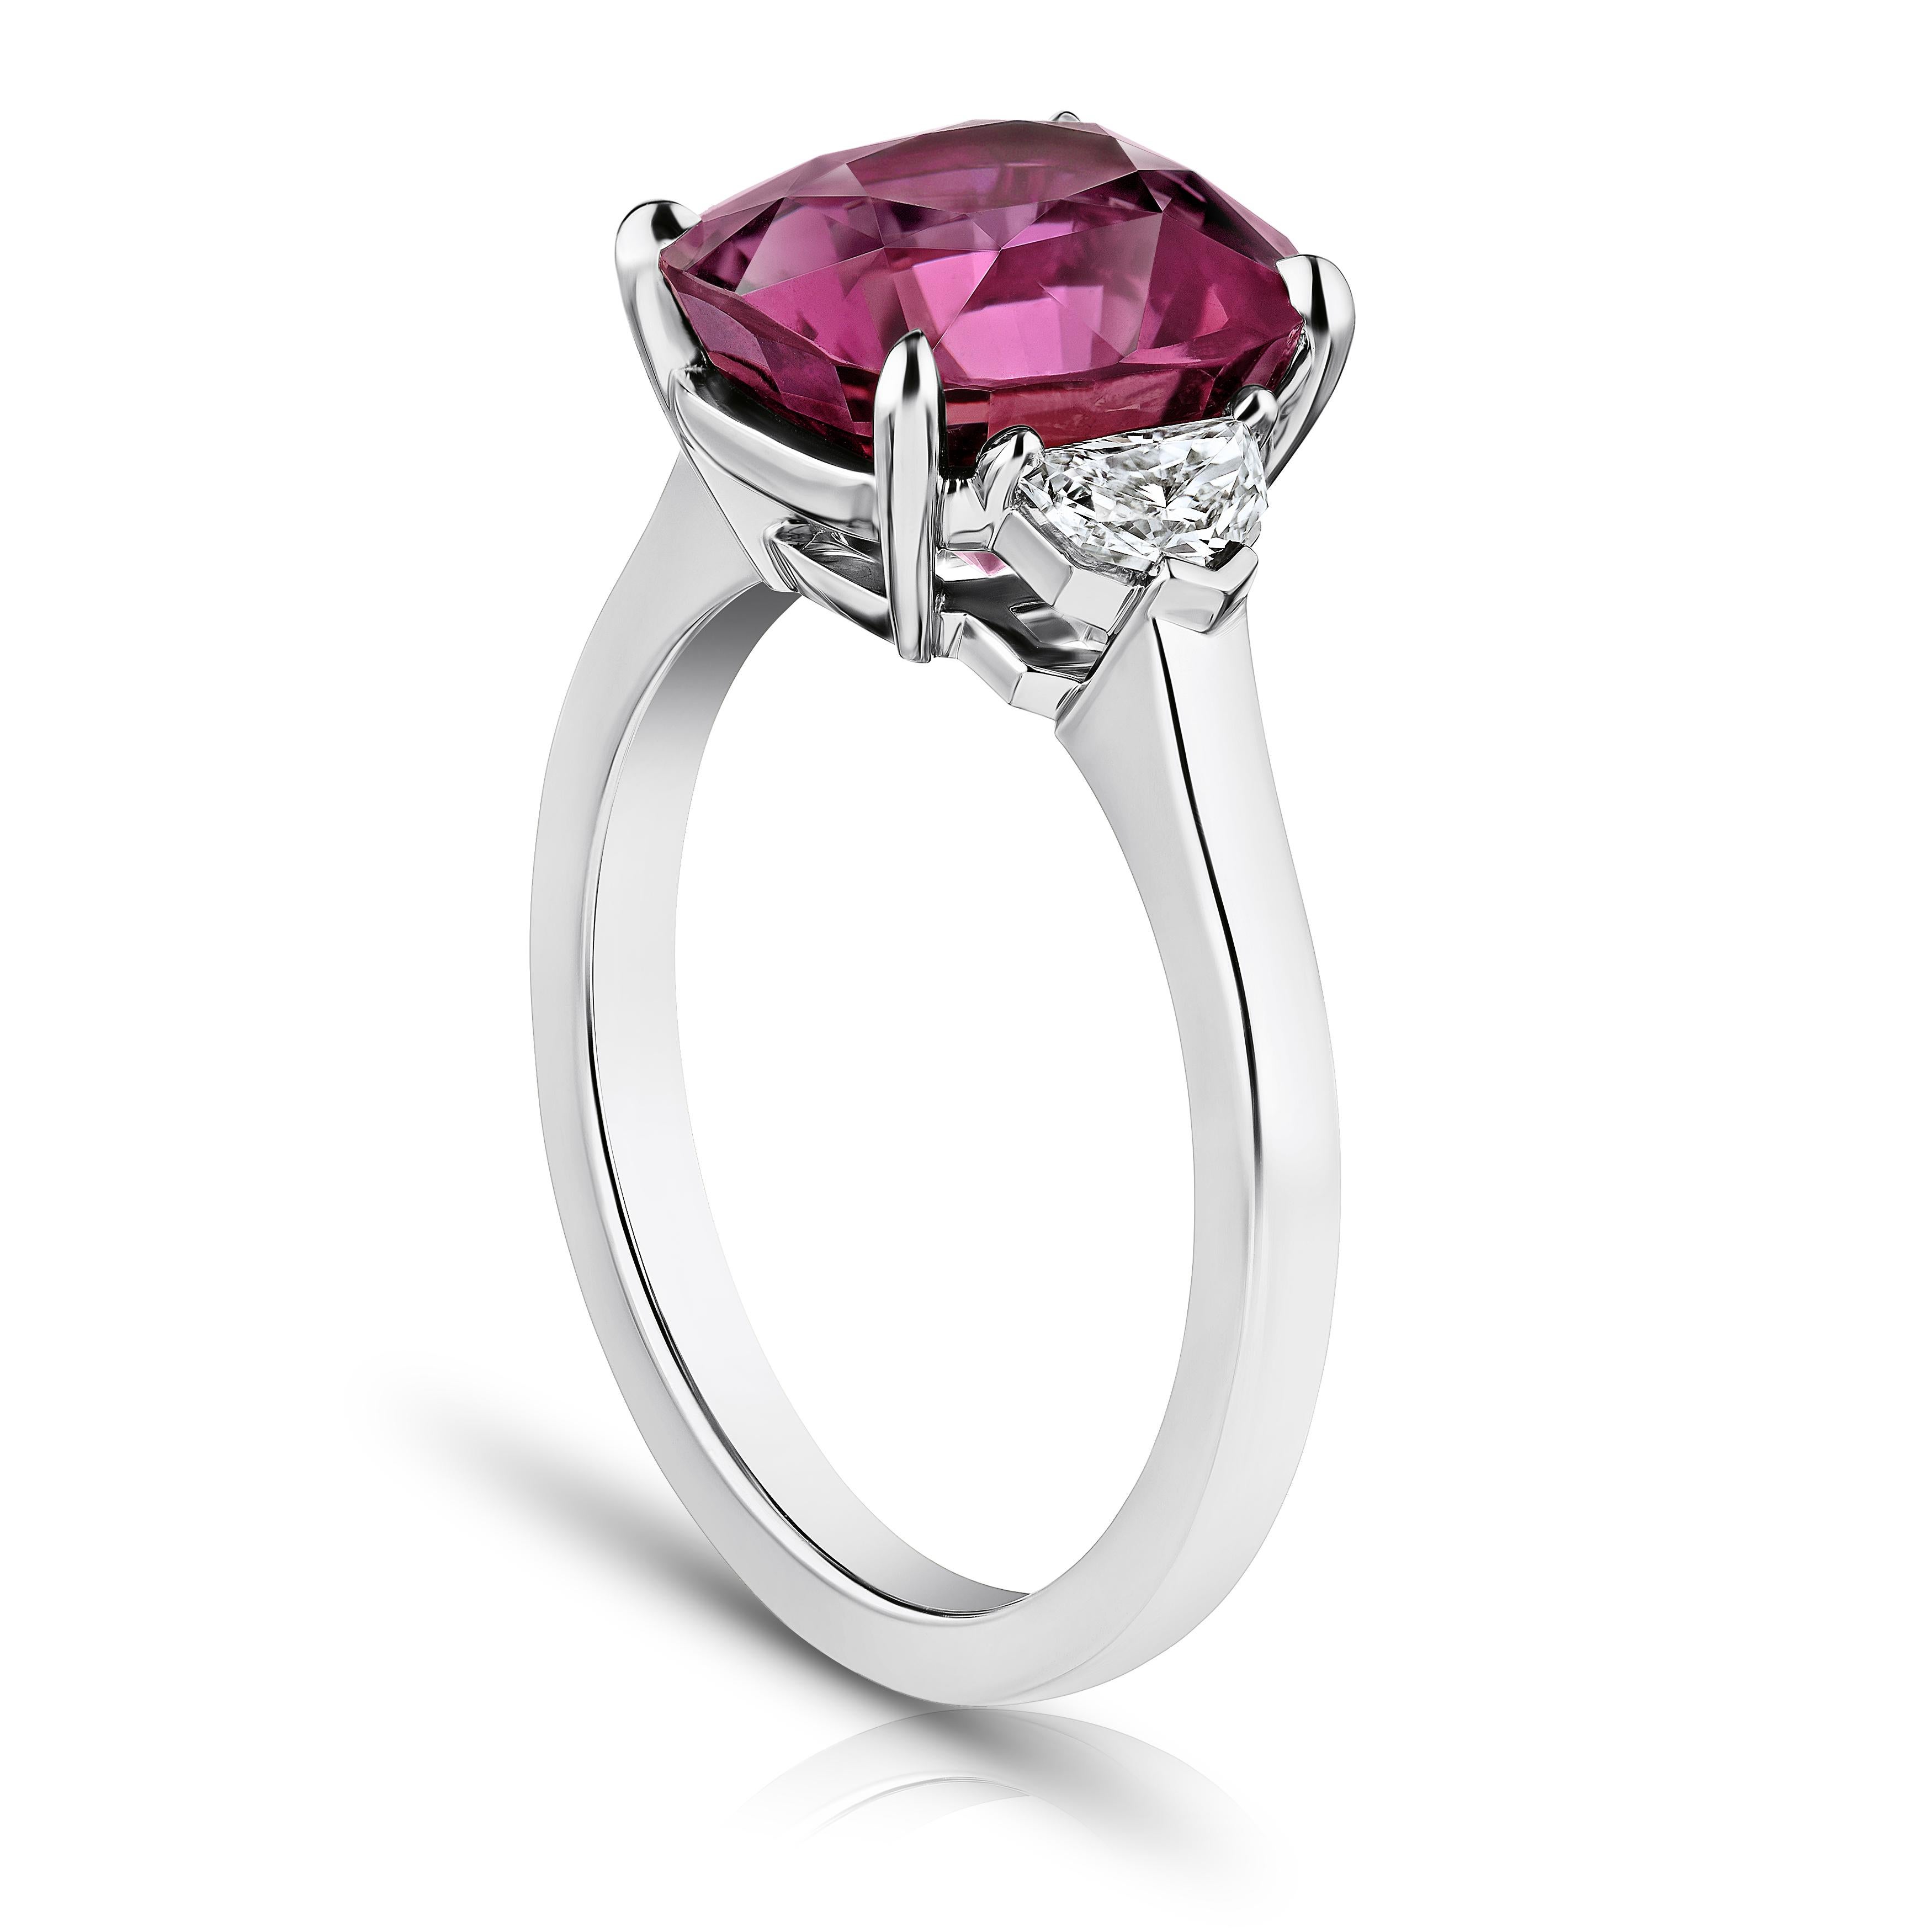 5.88 carat cushion pinkish red sapphire with epaulet cut diamonds .34 carats set in a platinum ring. Size 7.  Resizing ring to your finger size is included. 